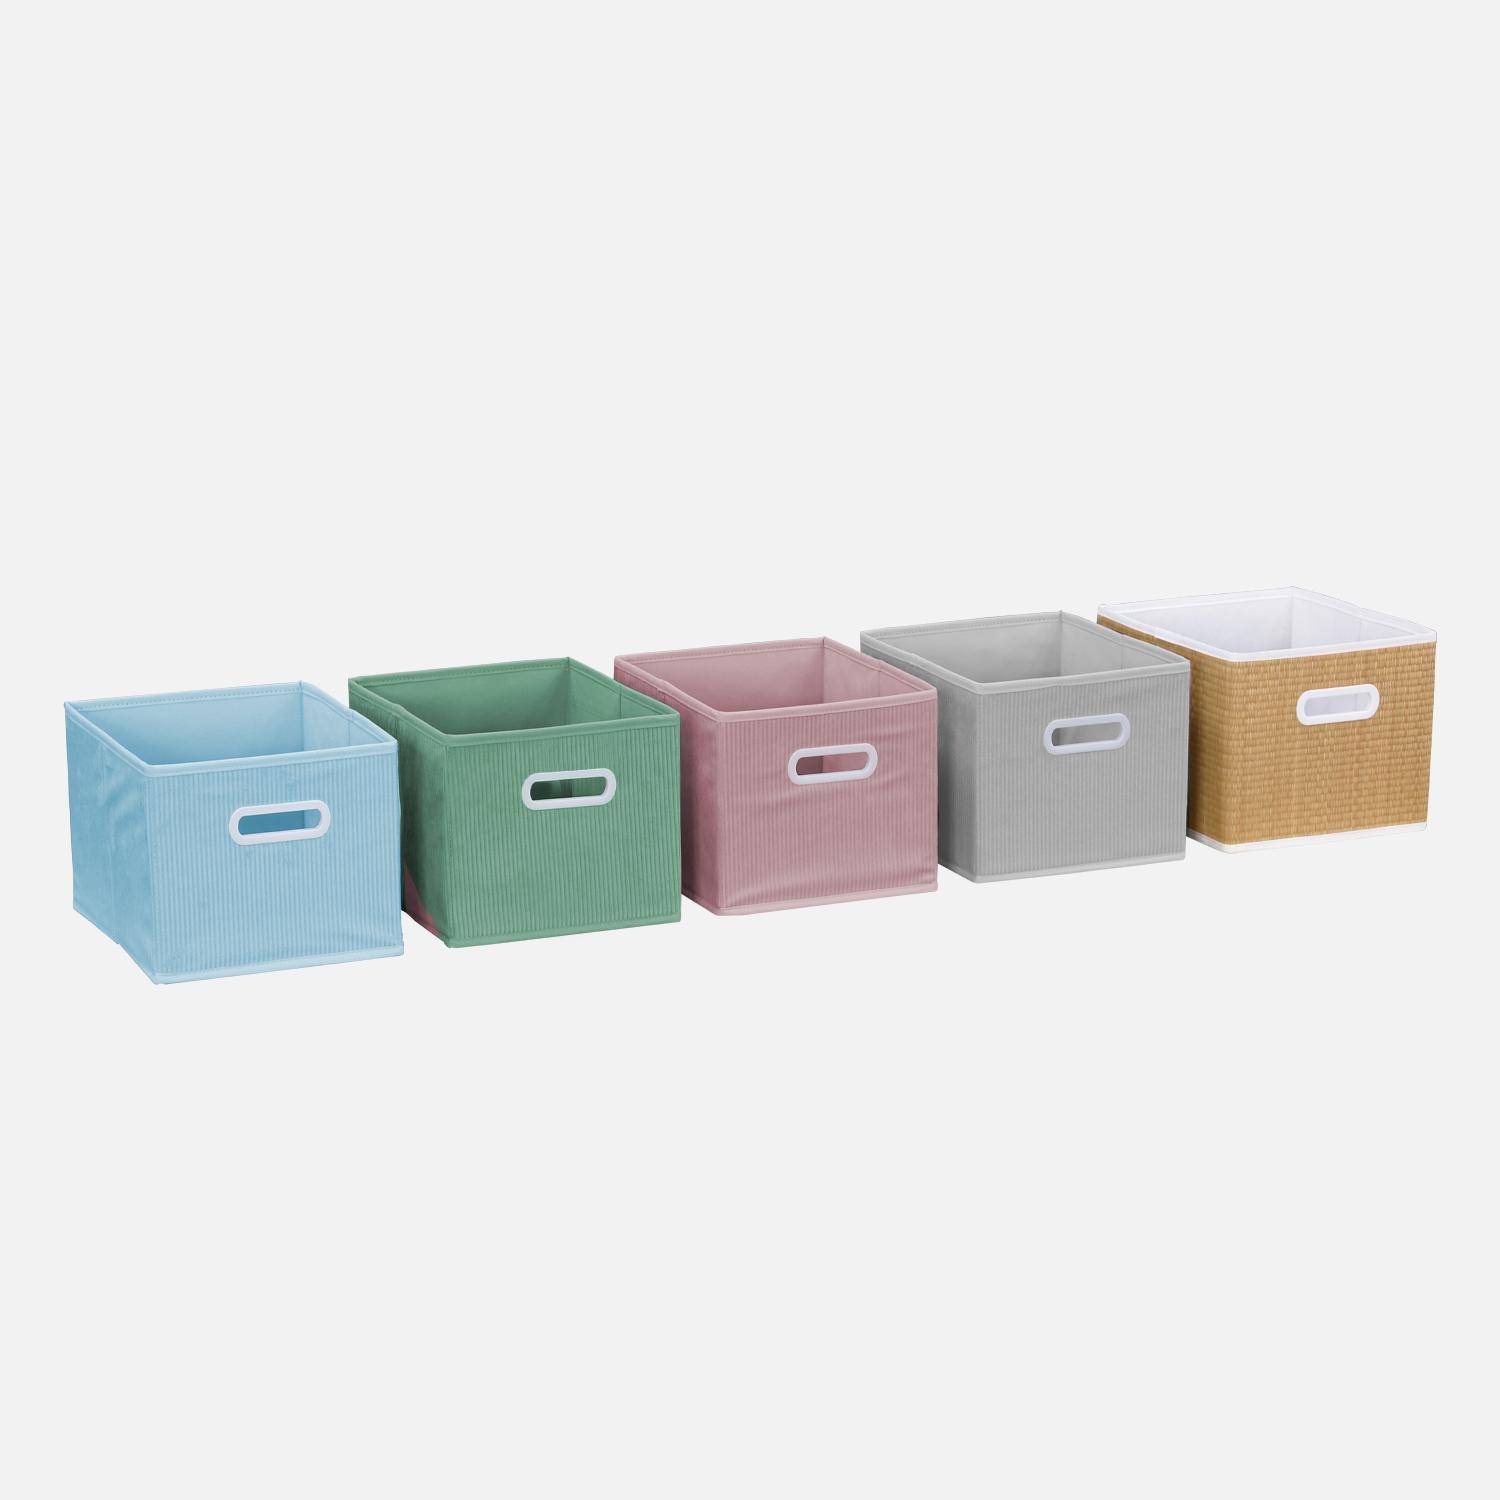 Storage unit for children with 7 compartments, 2 green baskets and 2 grey velvet baskets Photo4